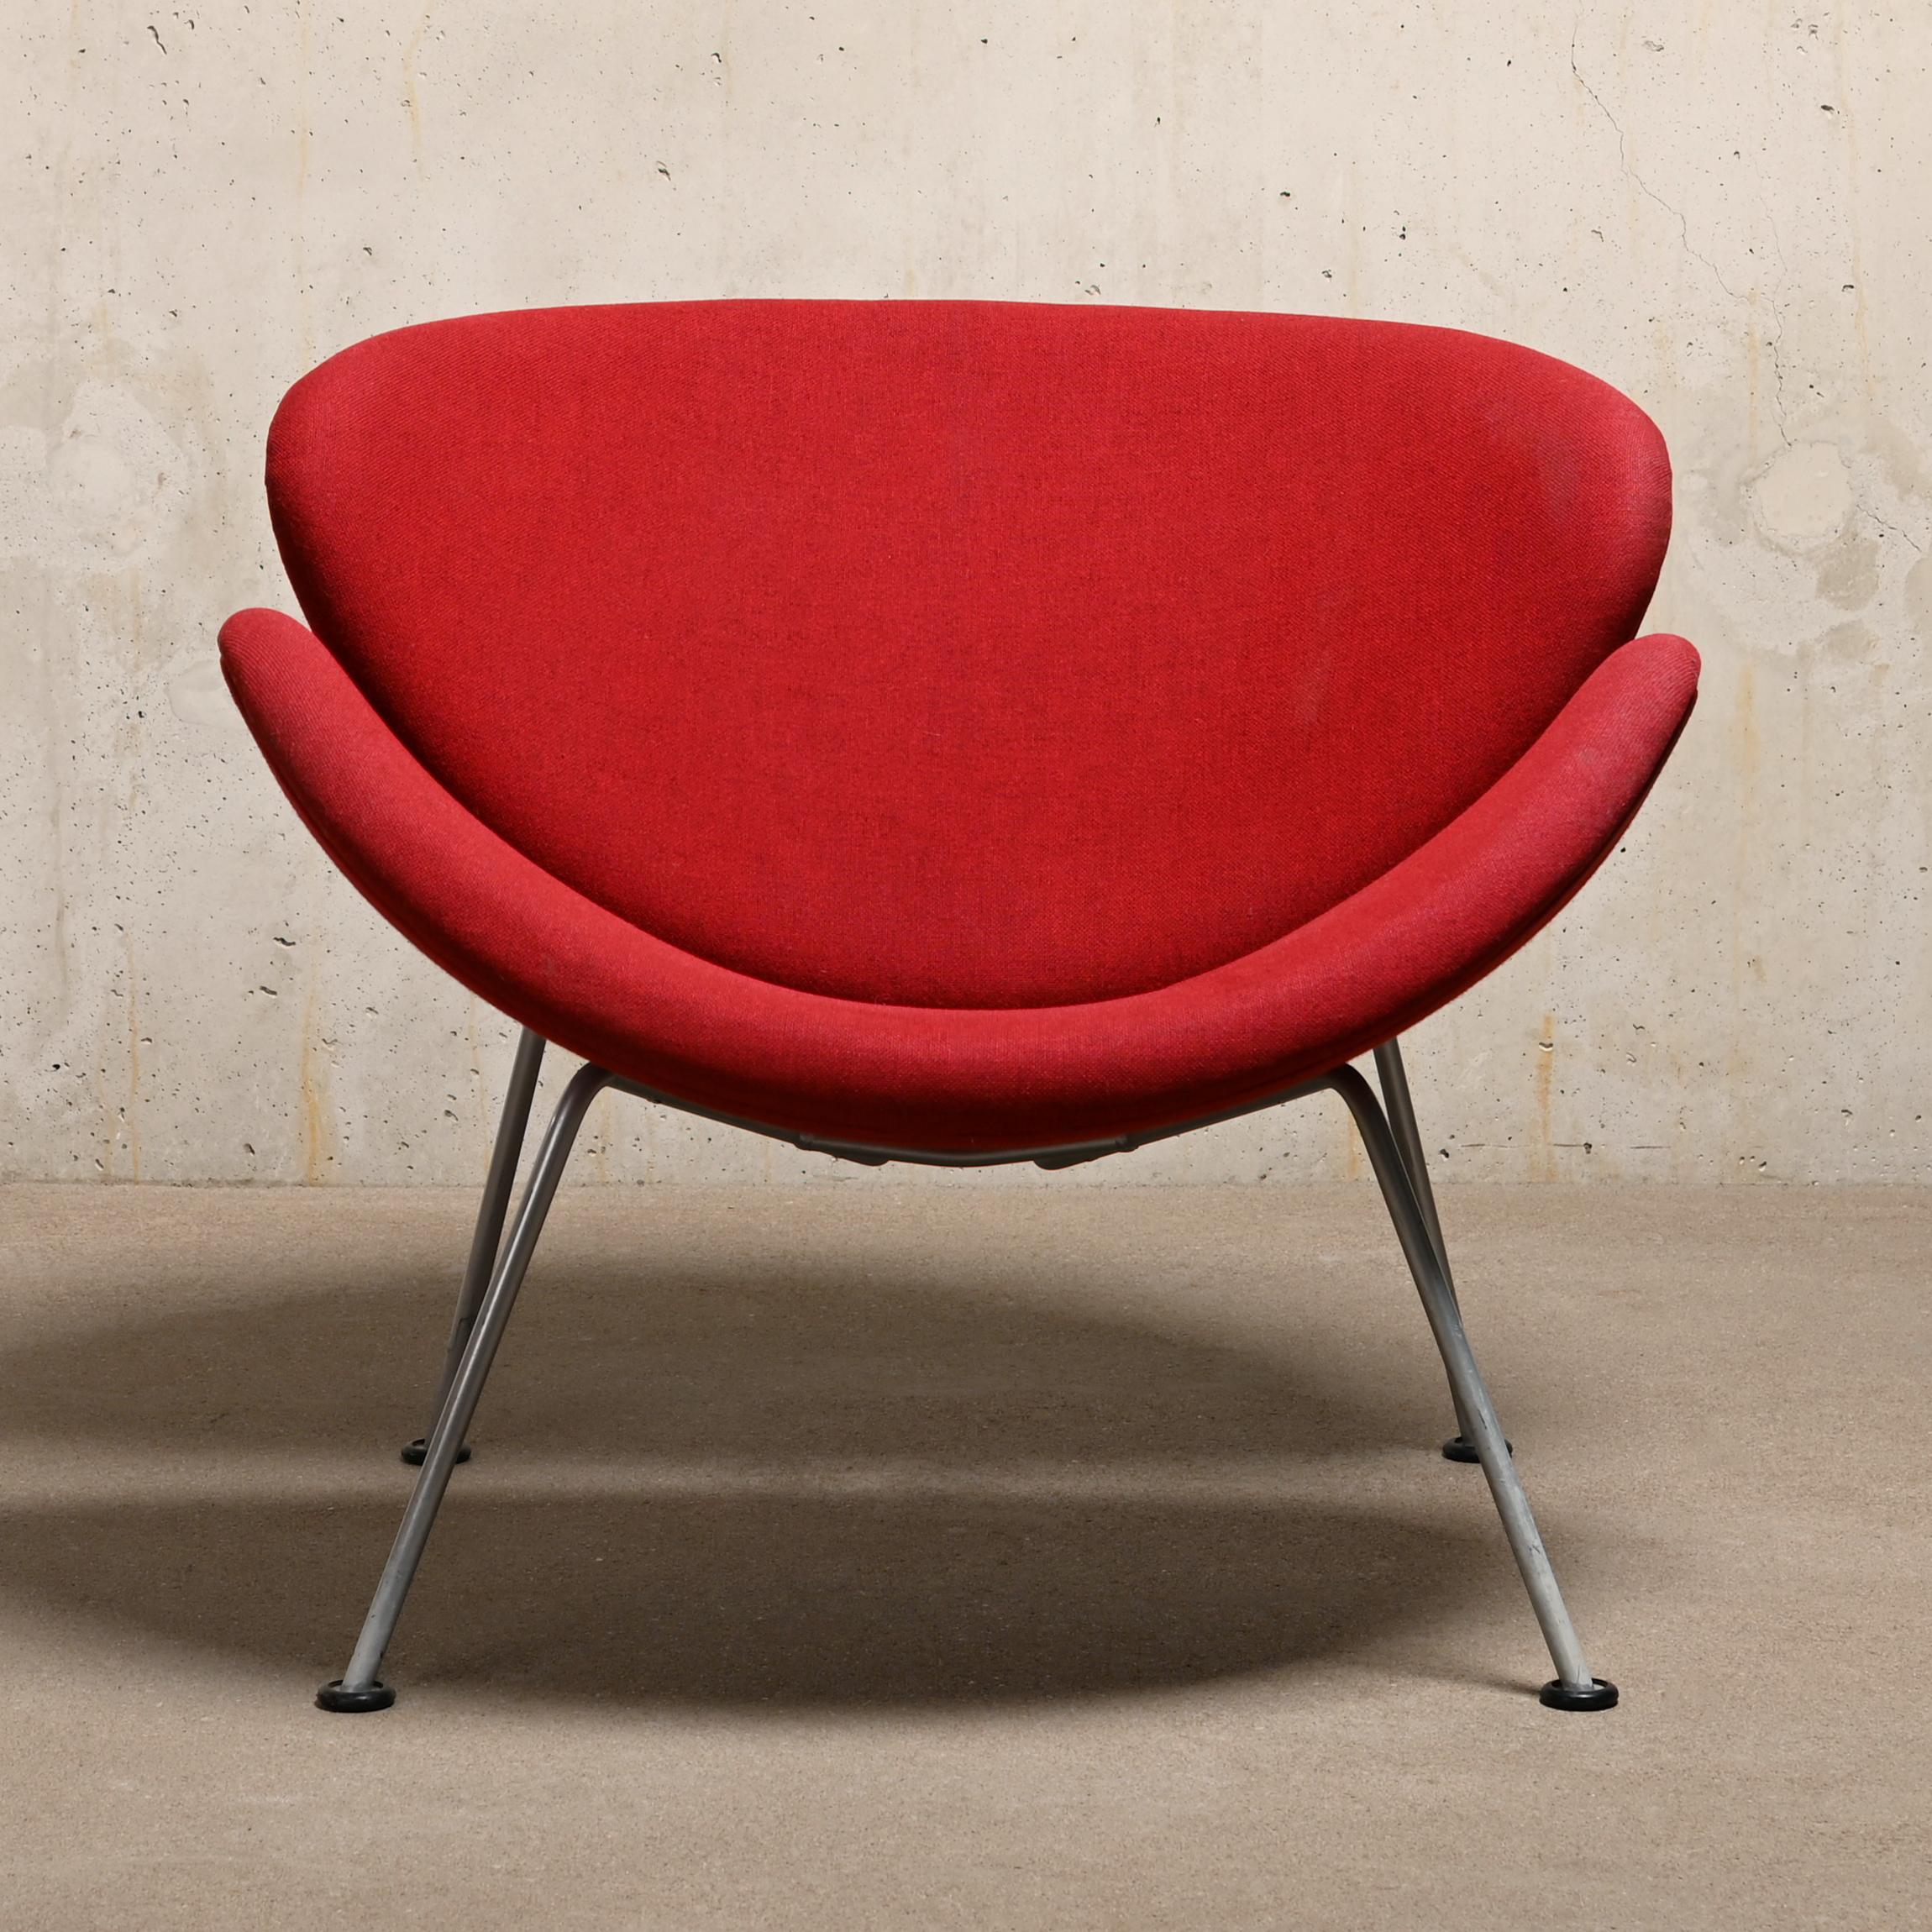 Comfortable and cozy armchair designed by Pierre Paulin for Artifort. Steel frame with molded wooden shells covered with foam and upholstered in an original red fabric. The fabric is in good vintage condition with slight wear and discolouration. The